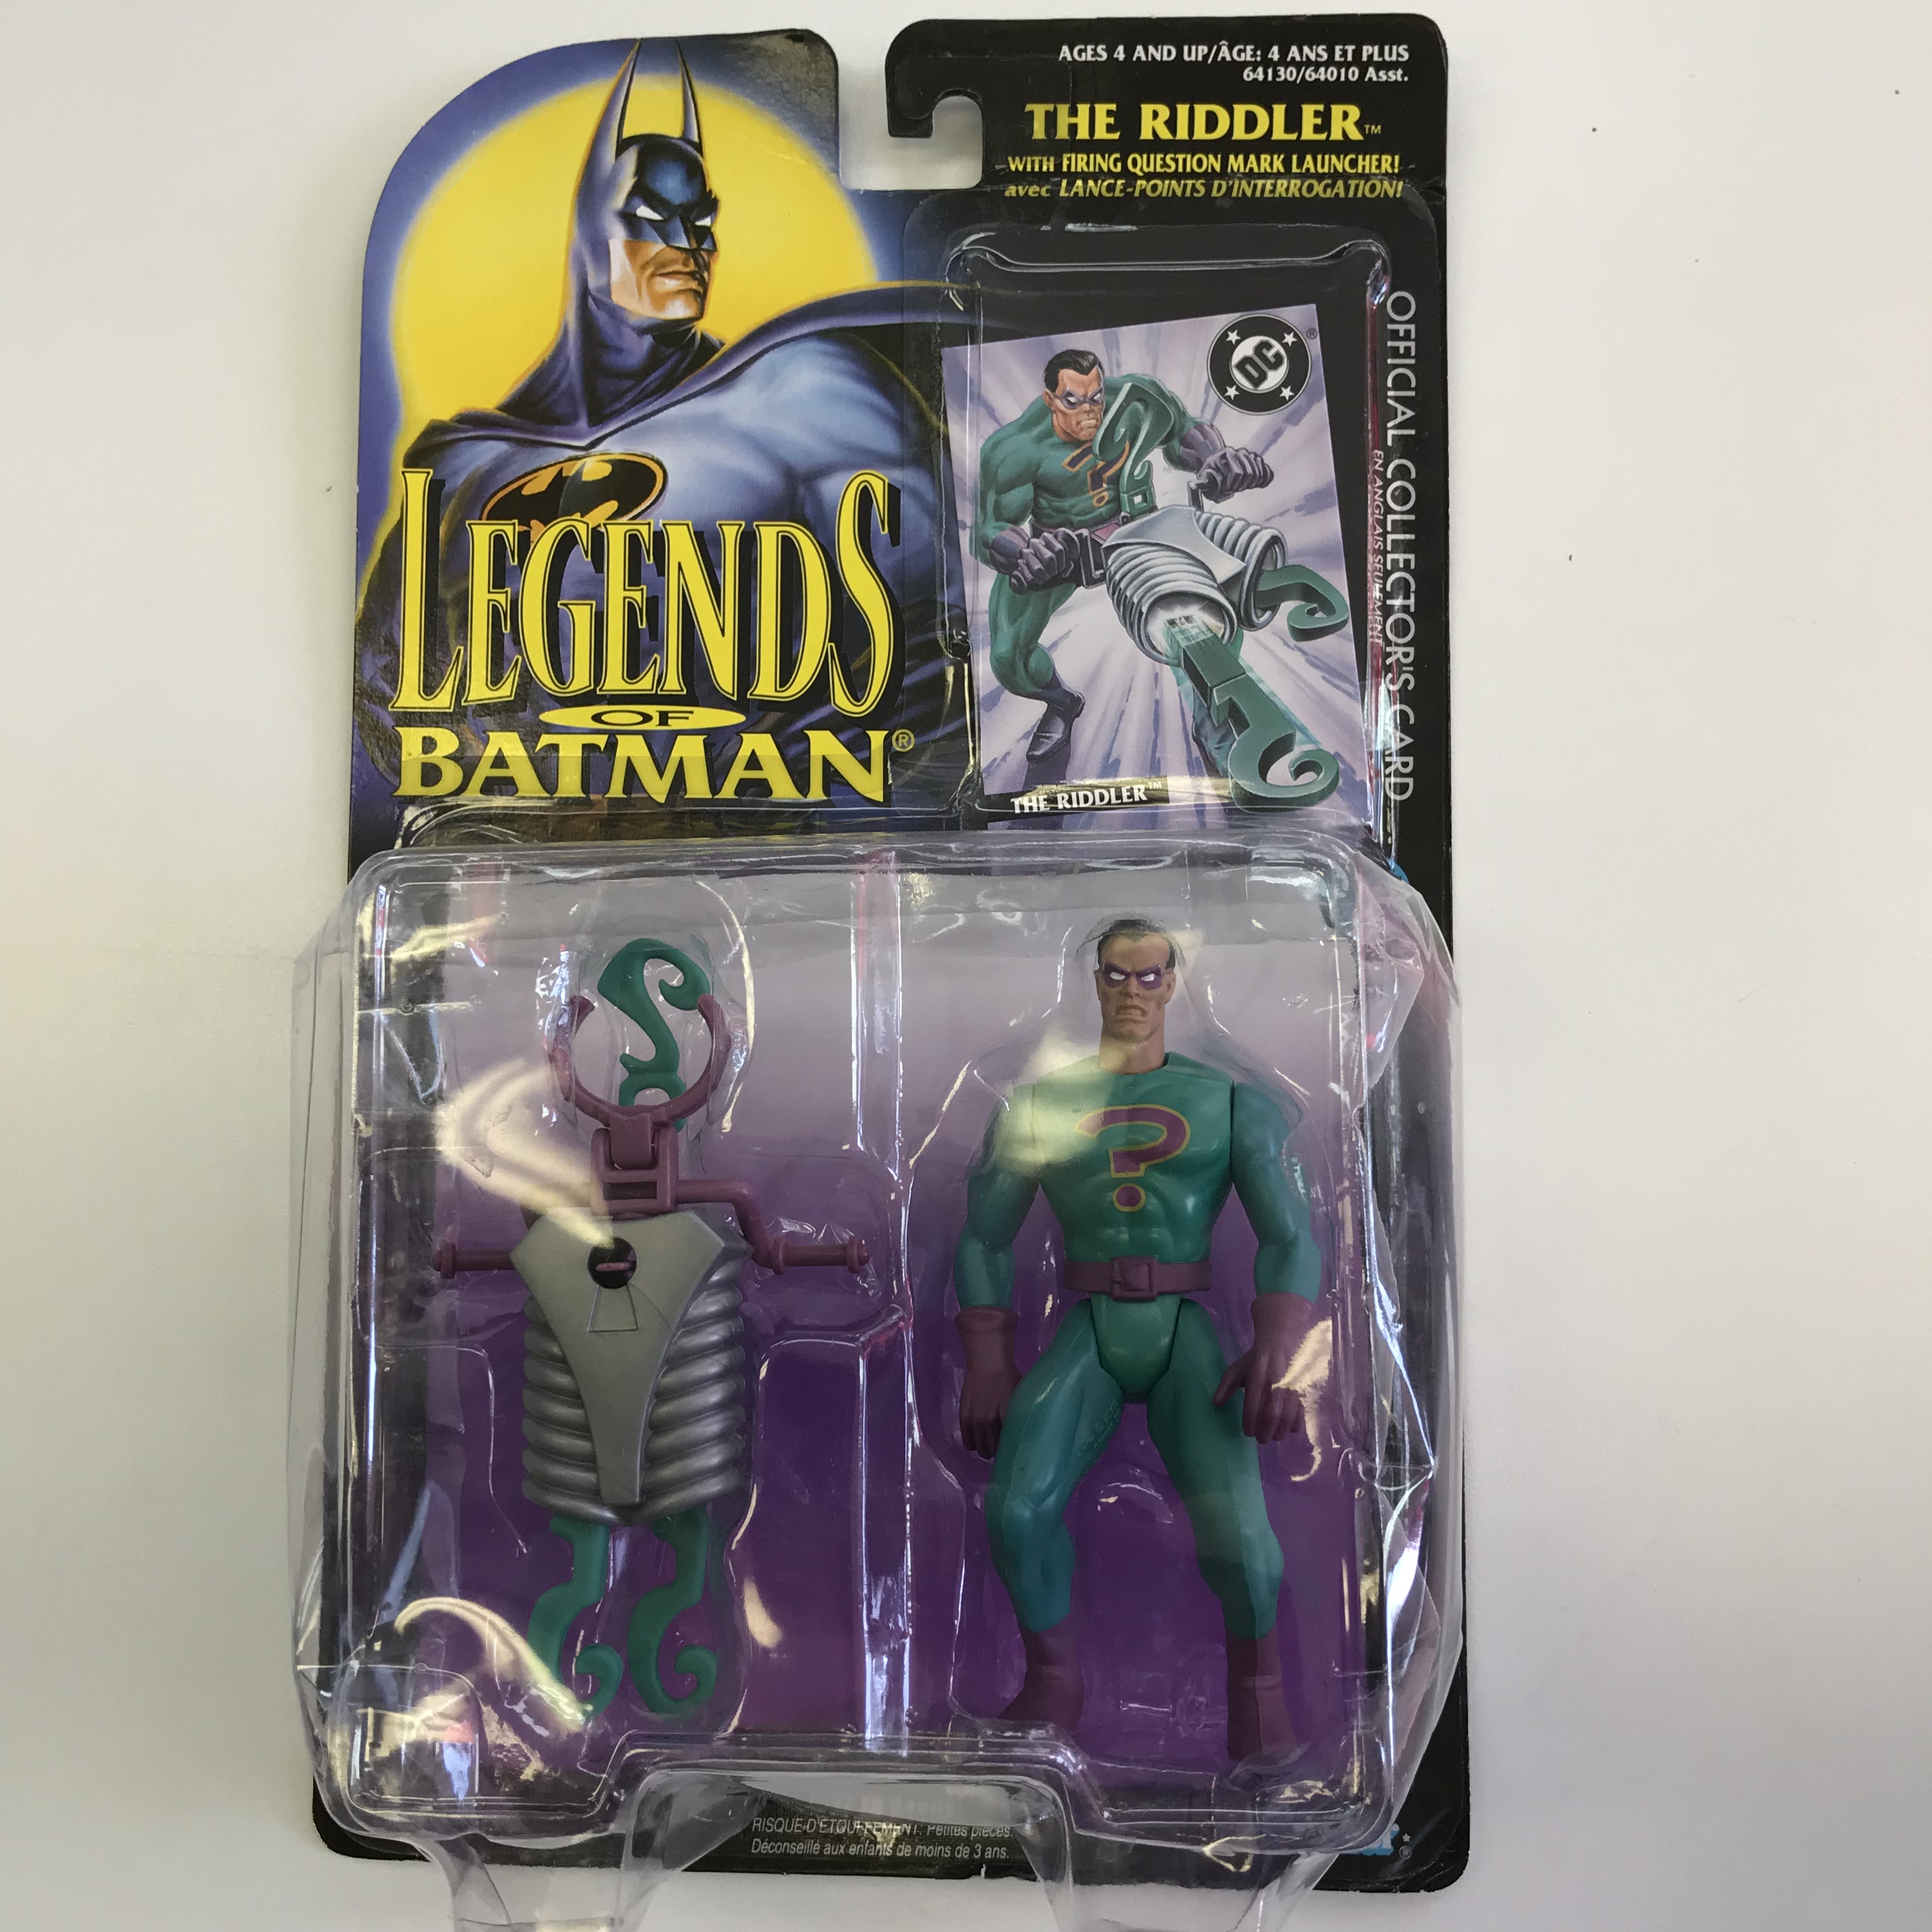 Kenner The Riddler with Firing Question Launcher Legend of Batman Action Figure for sale online 